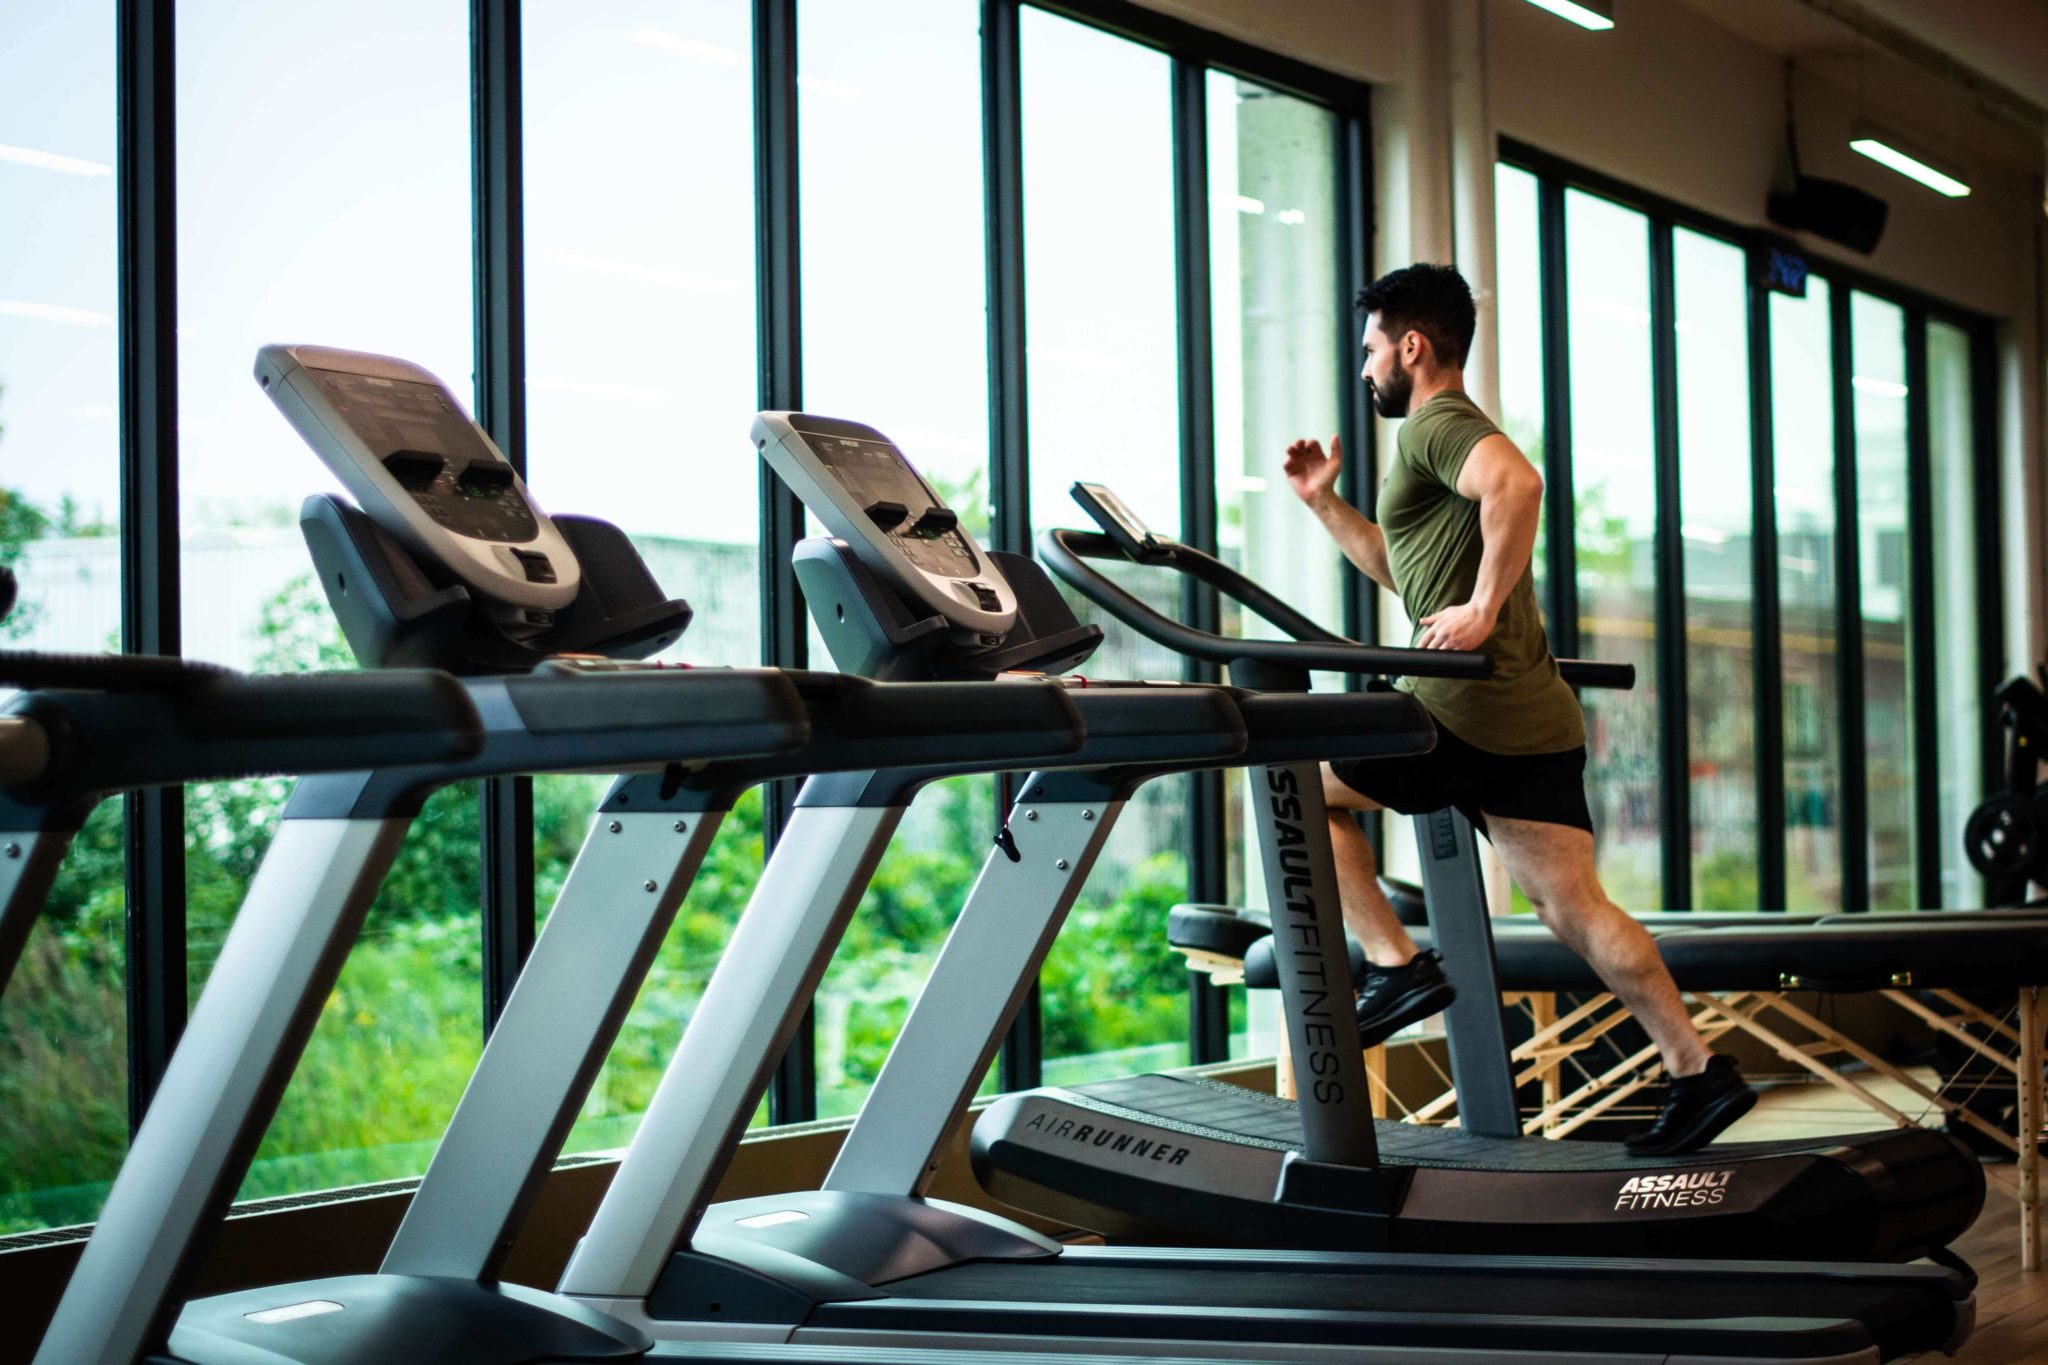 gyms that offer military discounts scaled